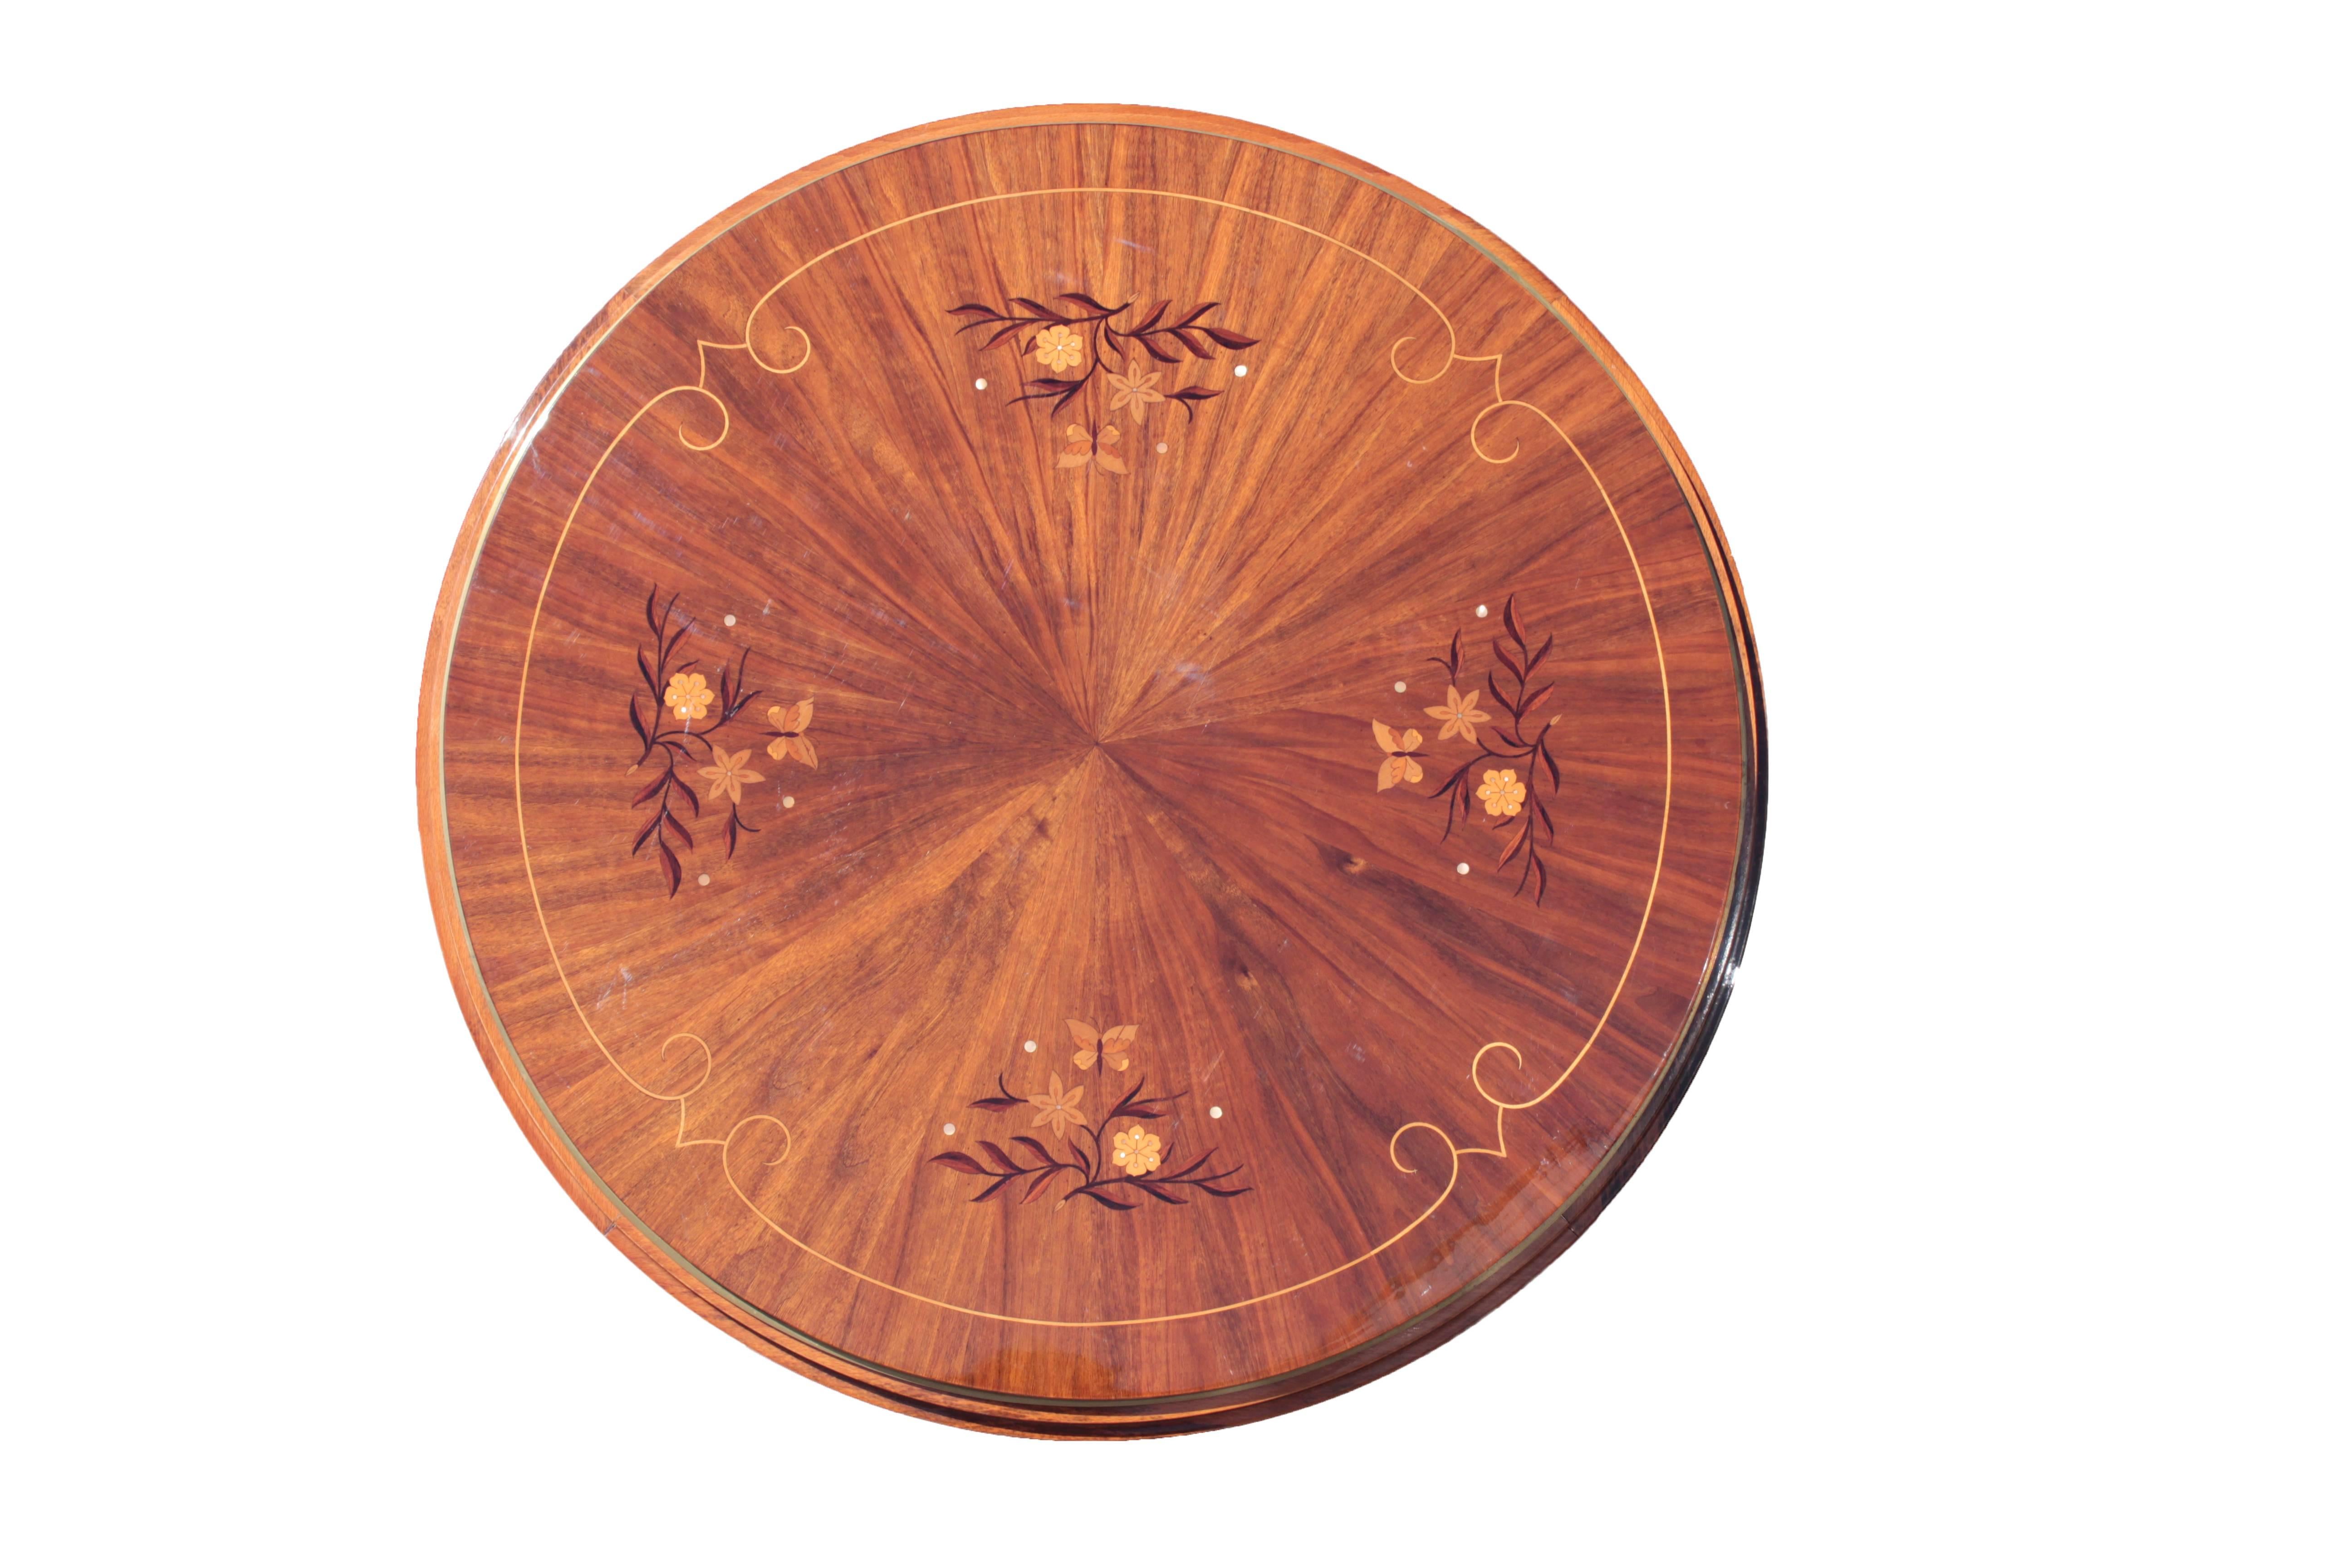 Bookmatch veneered palisander and beech stepped top banded with a large brass ring and decorated with inlays in mahogany, sycamore, walnut, maple and mother-of-pearl depicting flowers and butterflies; raised on four tapered conical legs in beech,